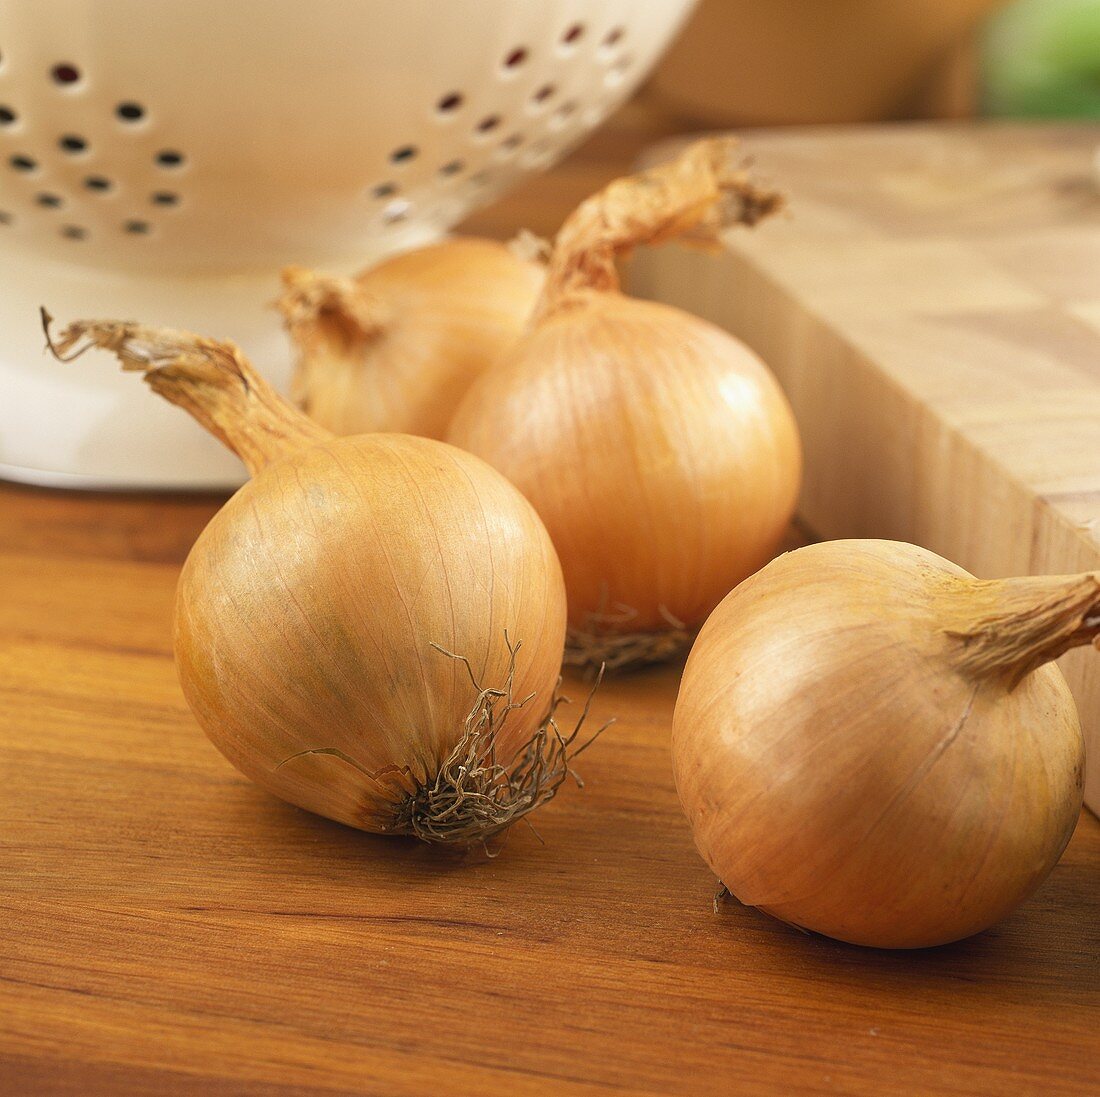 Four onions in a kitchen